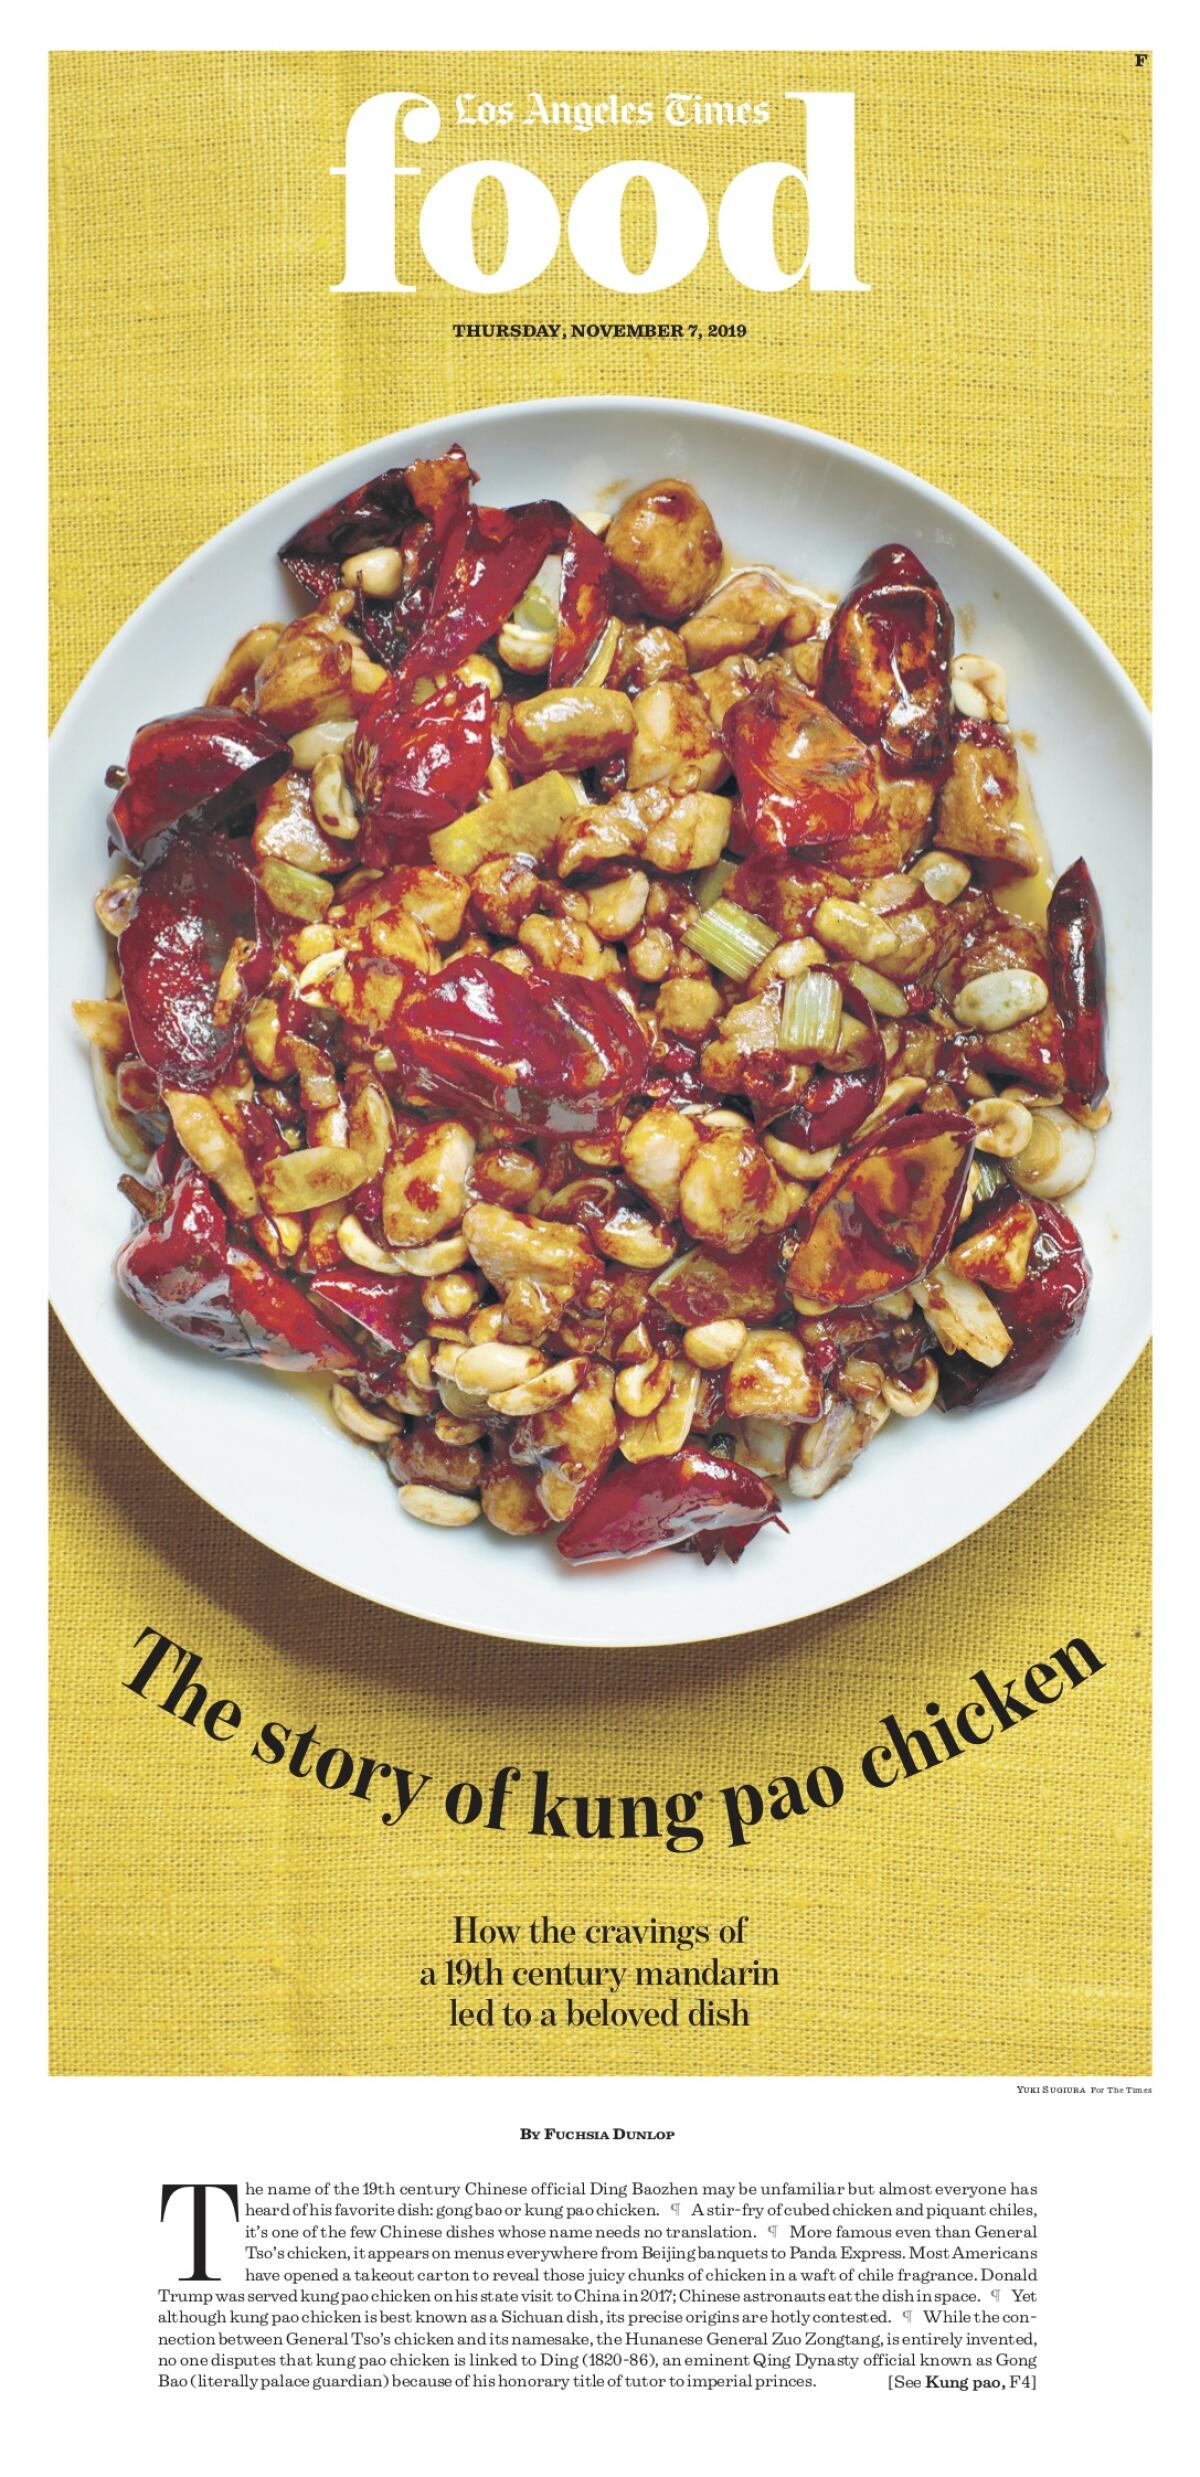 Los Angeles Times Food cover, November 7, 2019 